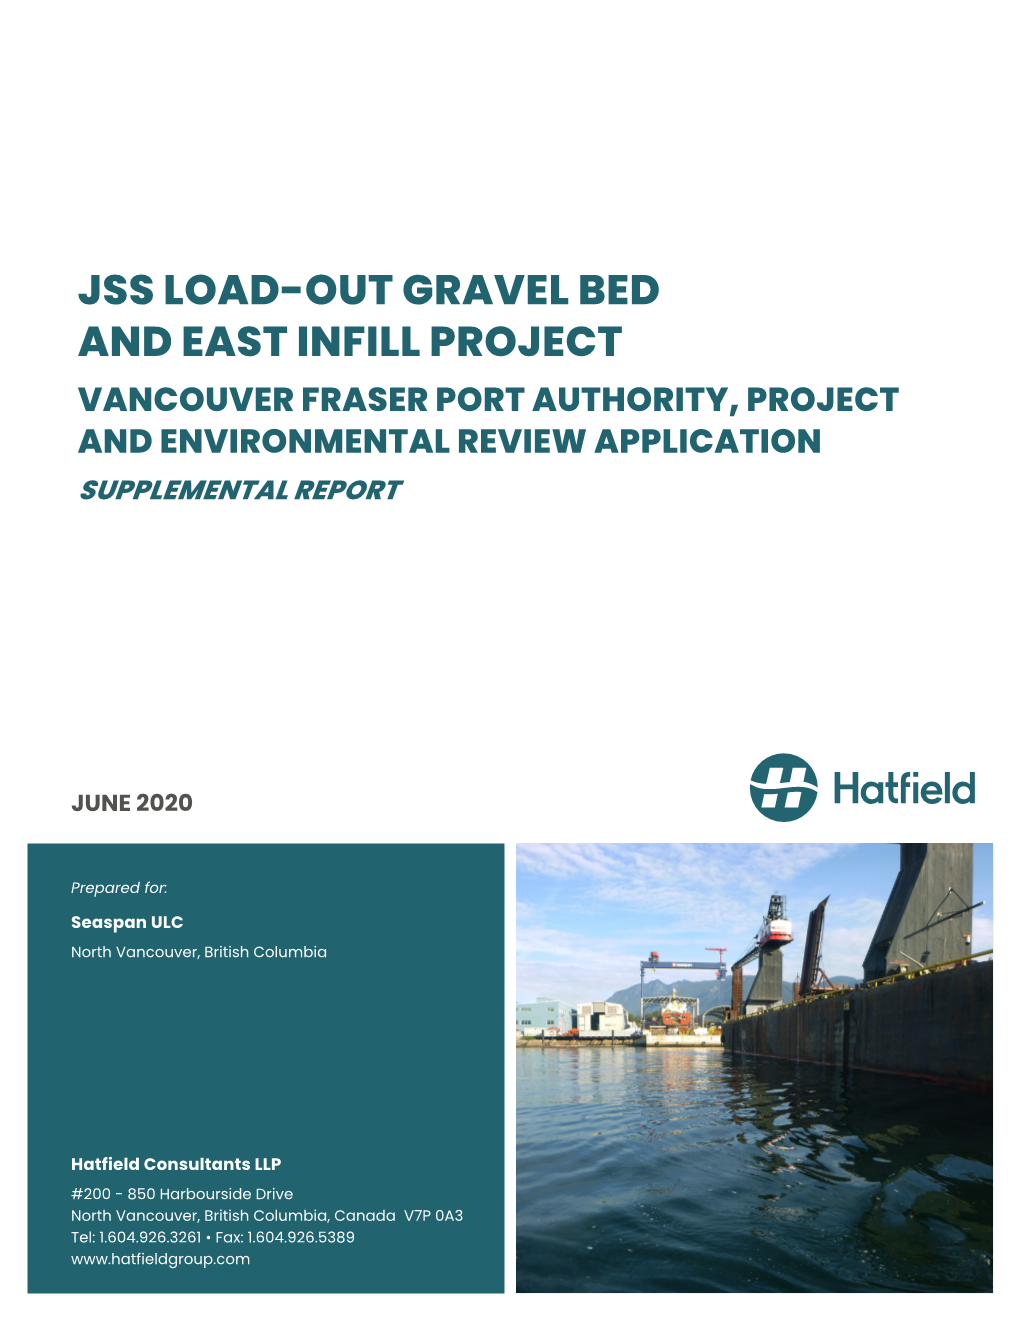 Jss Load-Out Gravel Bed and East Infill Project Vancouver Fraser Port Authority, Project and Environmental Review Application Supplemental Report